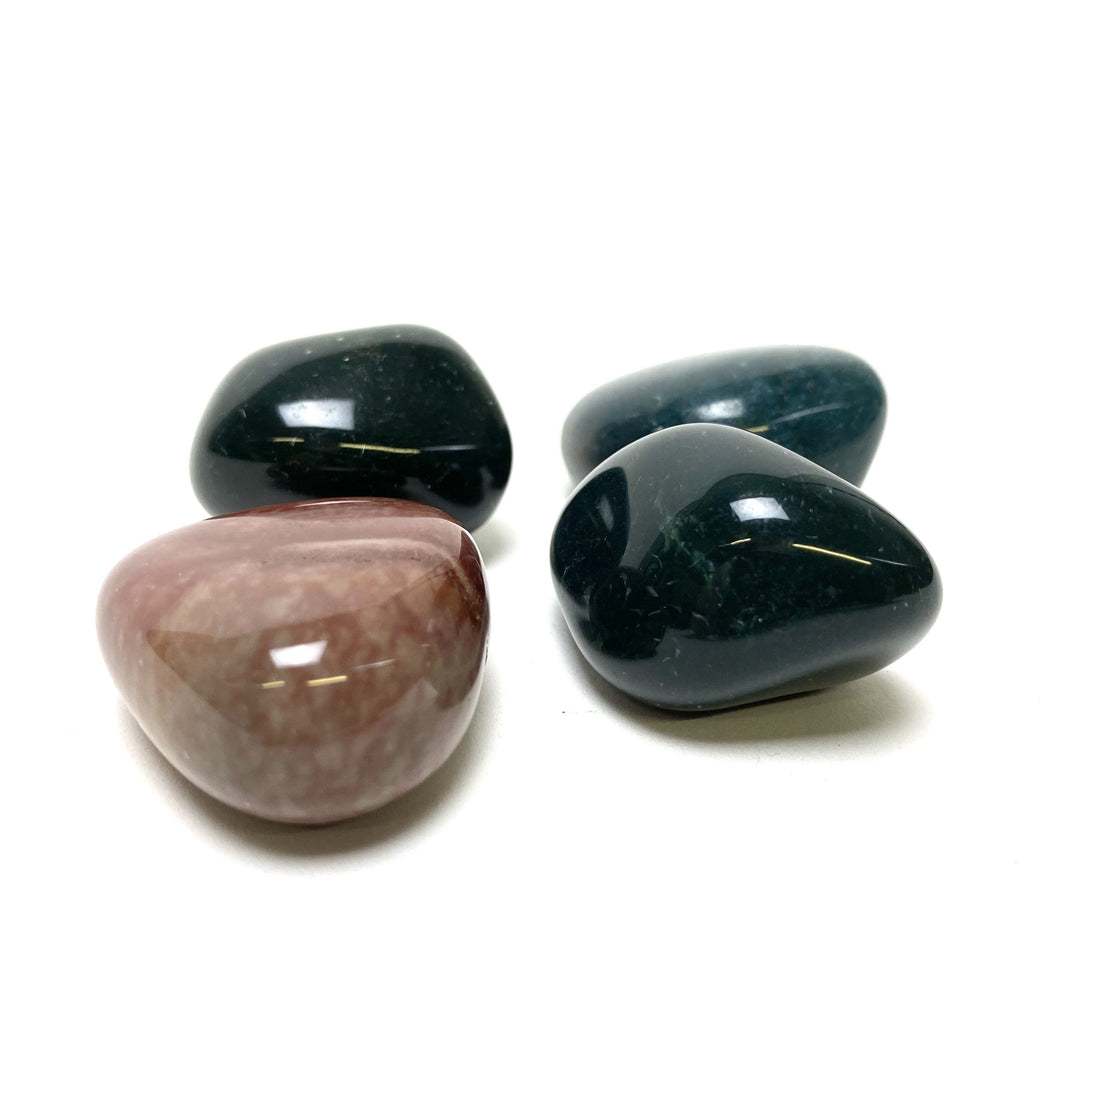 Bloodstone Tumbles Bloodstone Crystals A. $4.00 